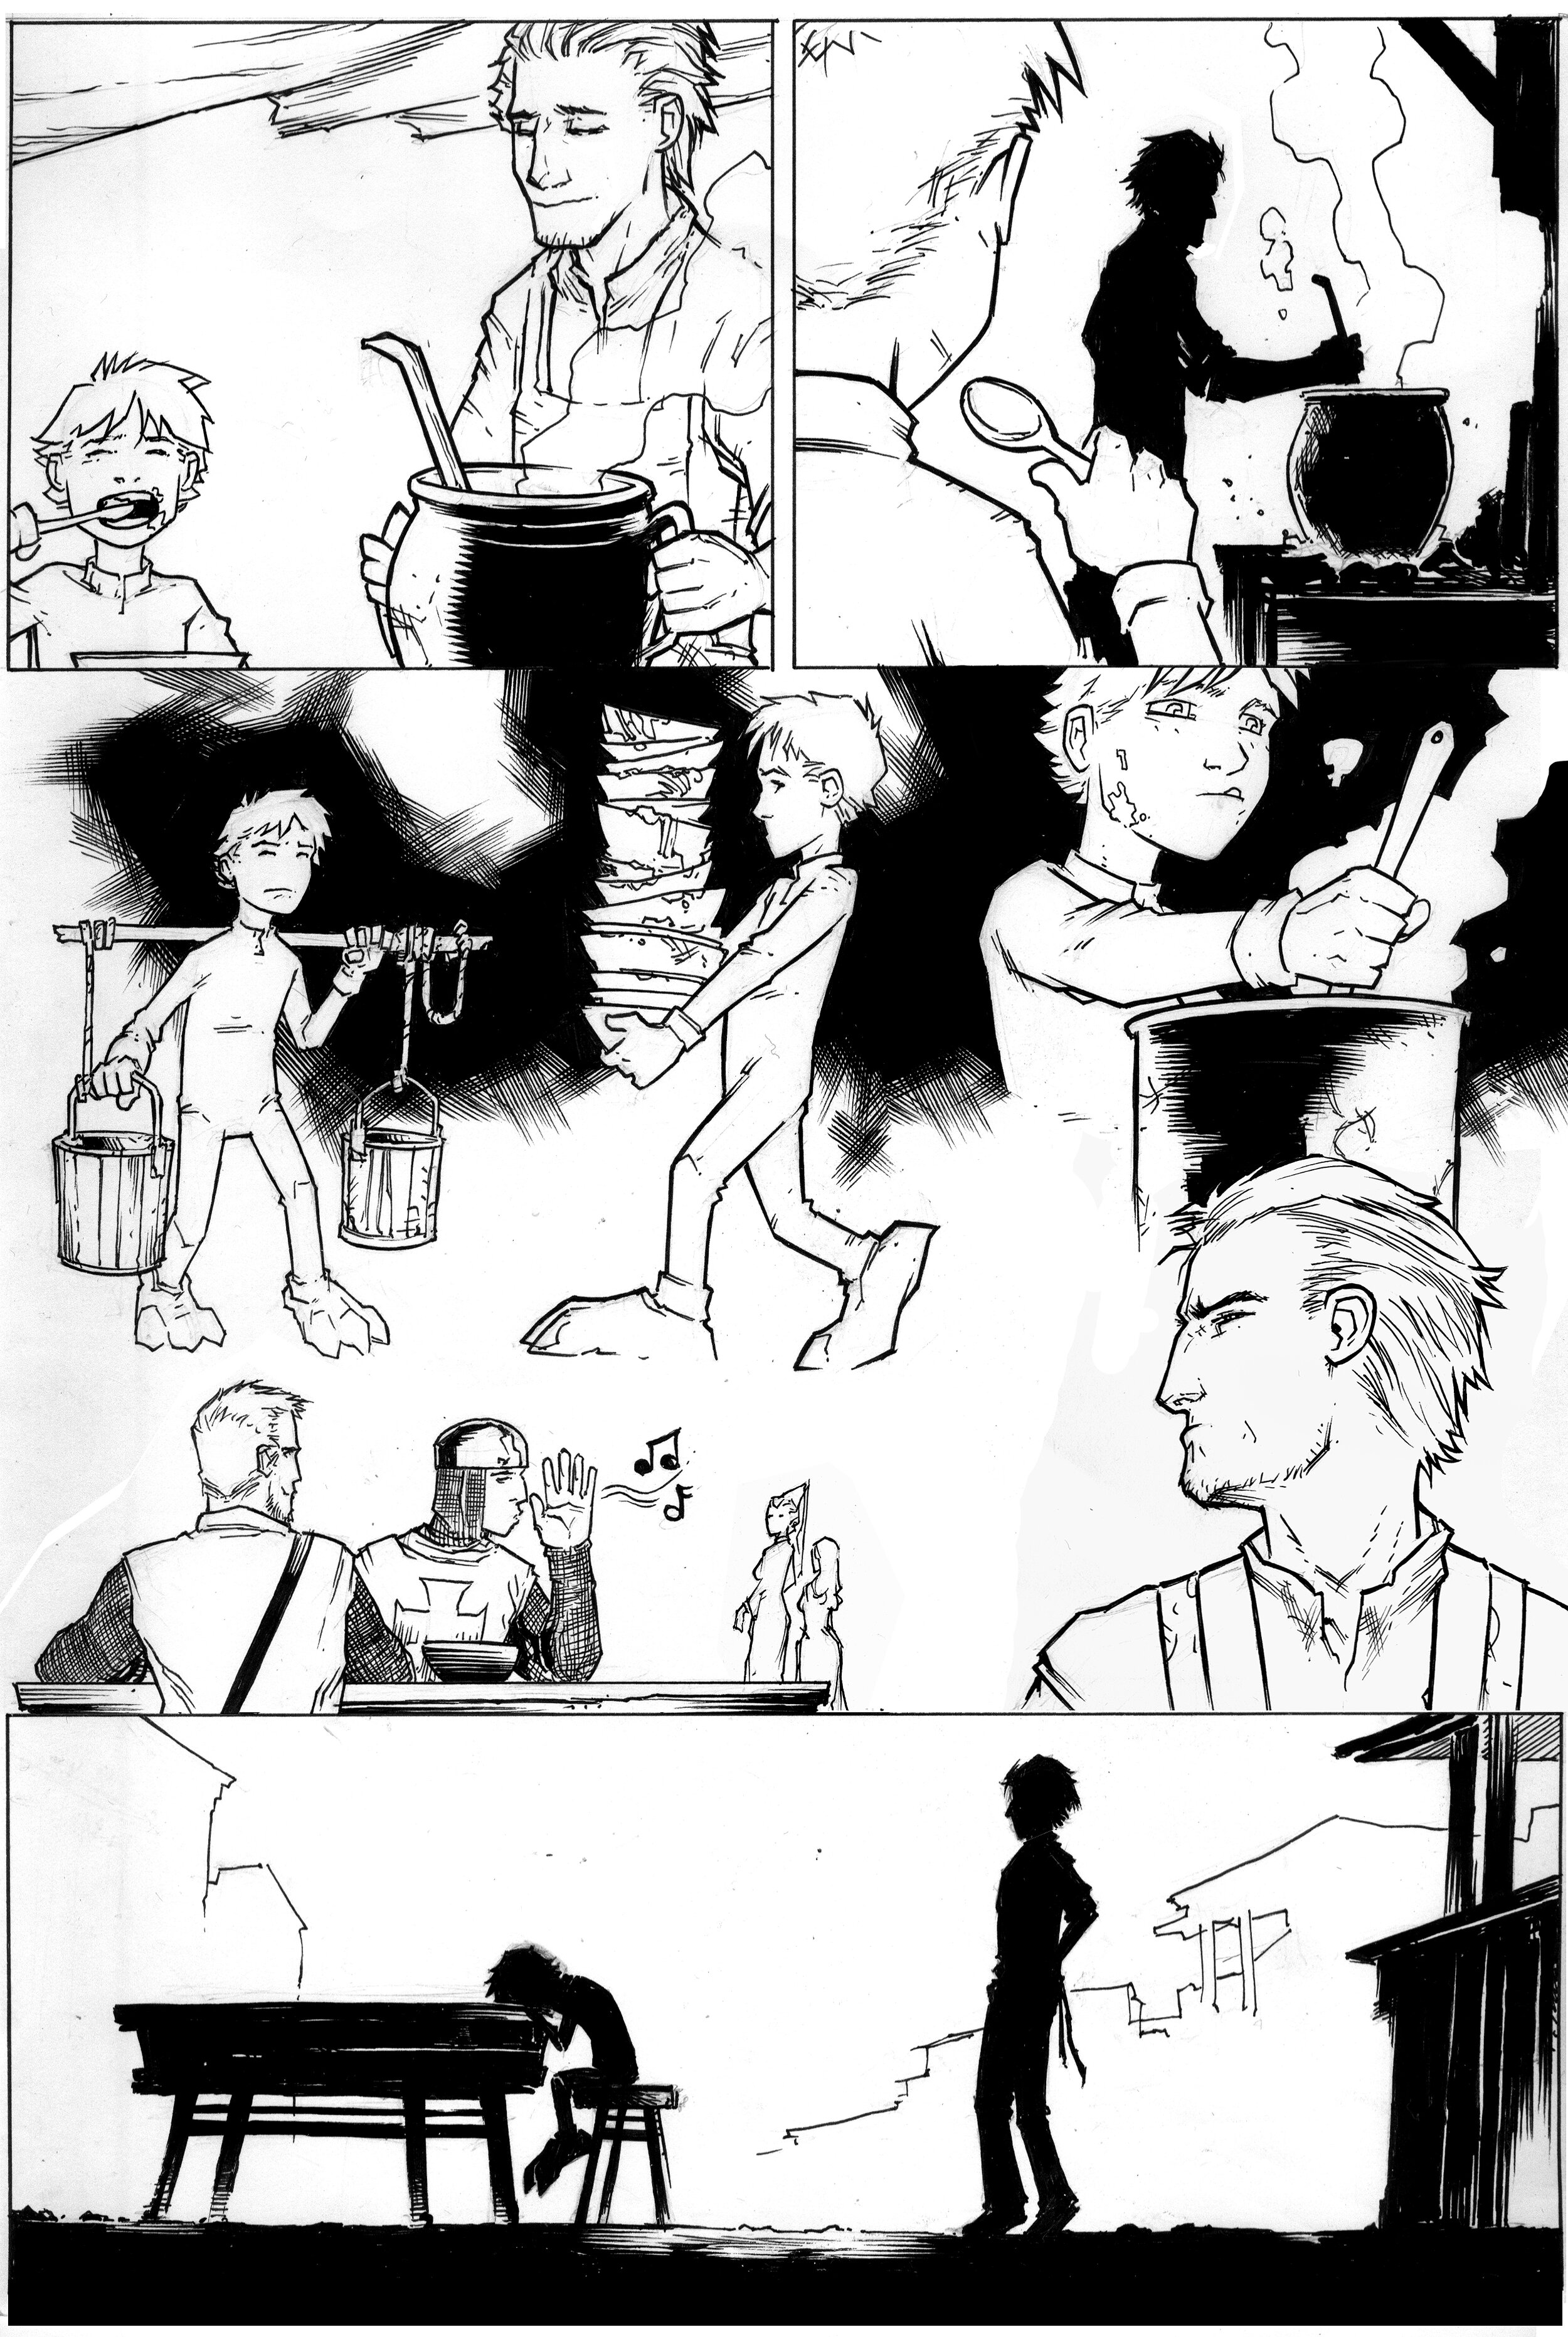 CW issue2 page16.jpg